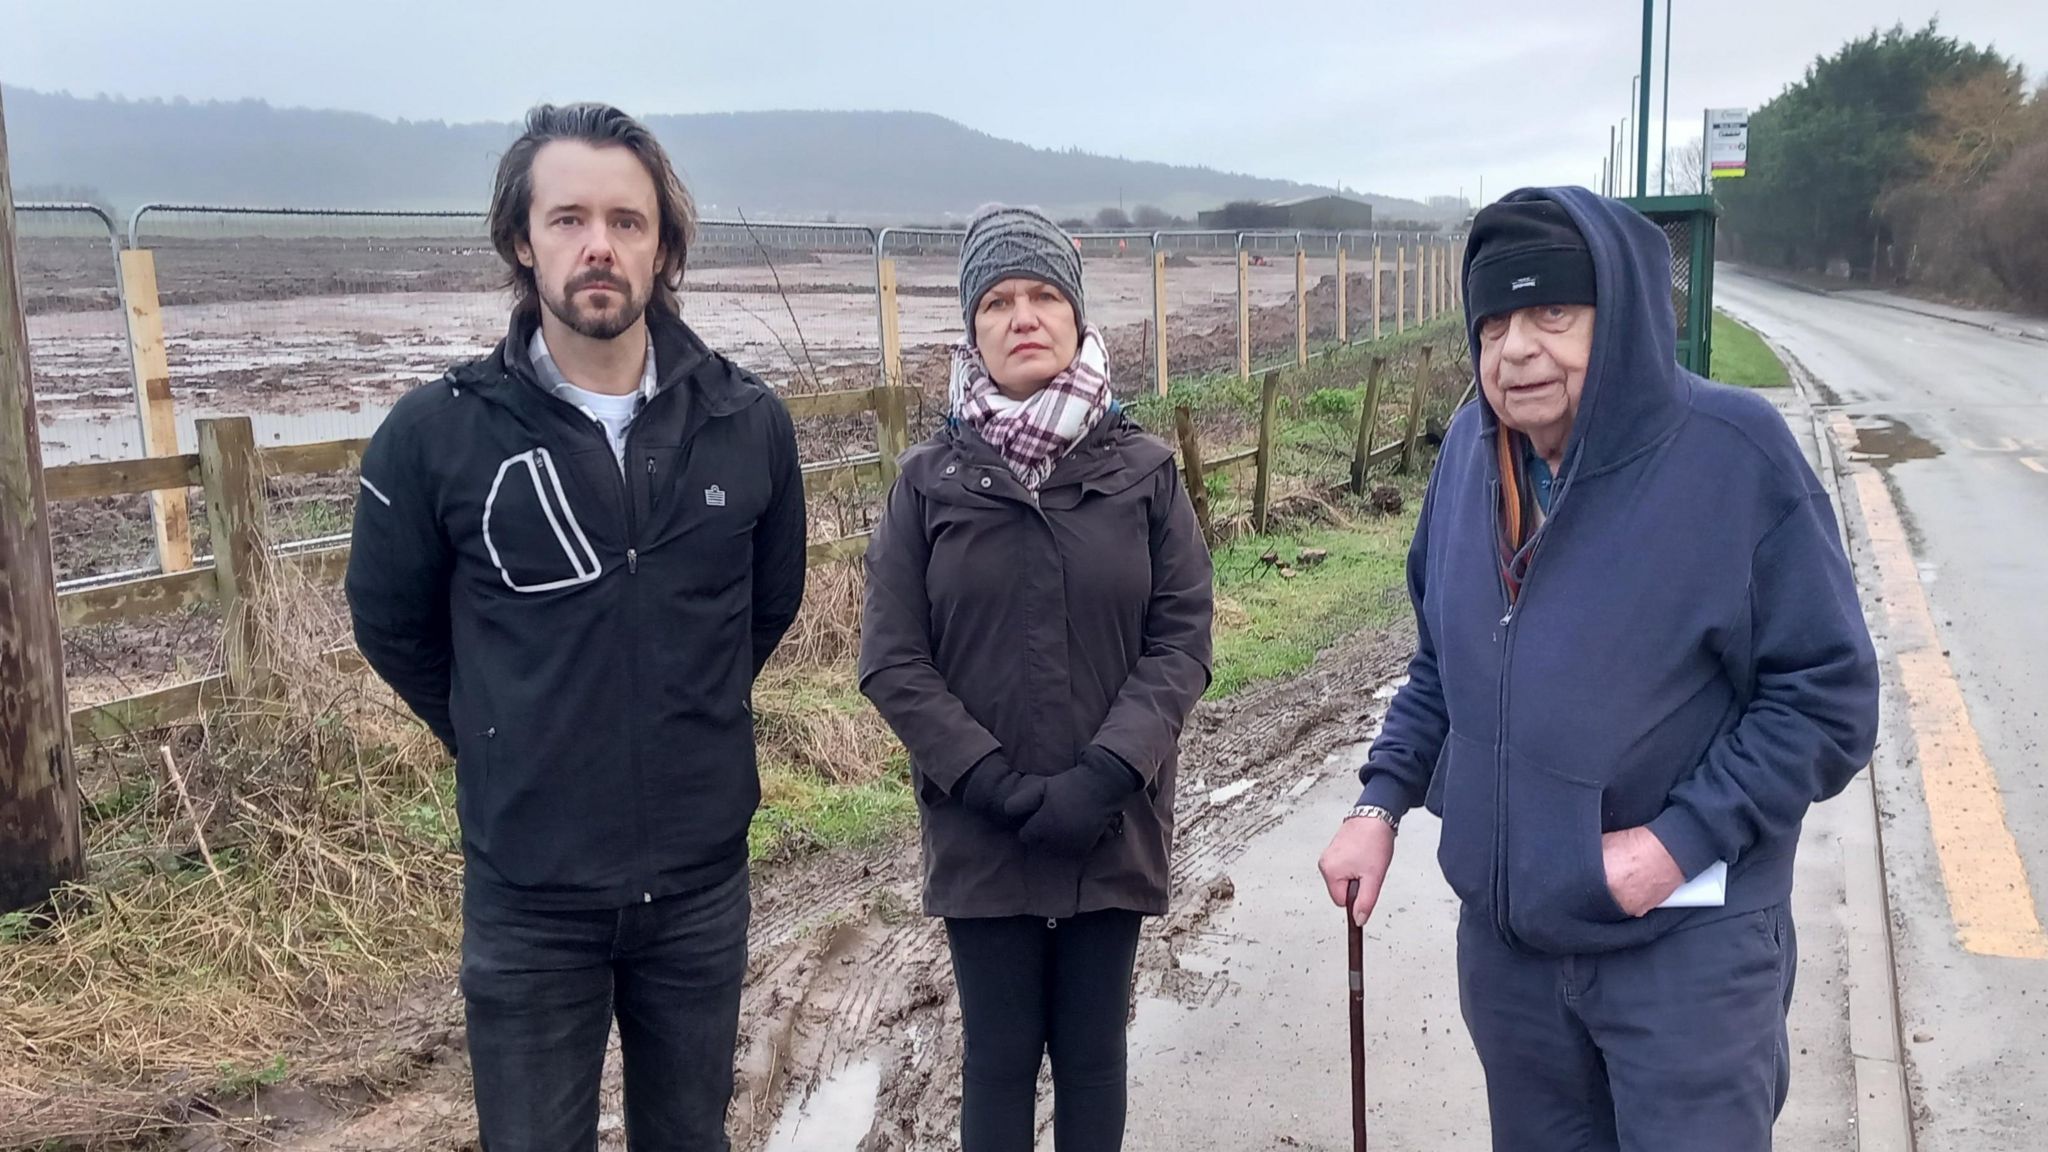 Left to right, Councillor Dr Tristan Learoyd, archaeologist Dr Kendra Quinn and Marske parish councillor Peter Finlinson at the site.